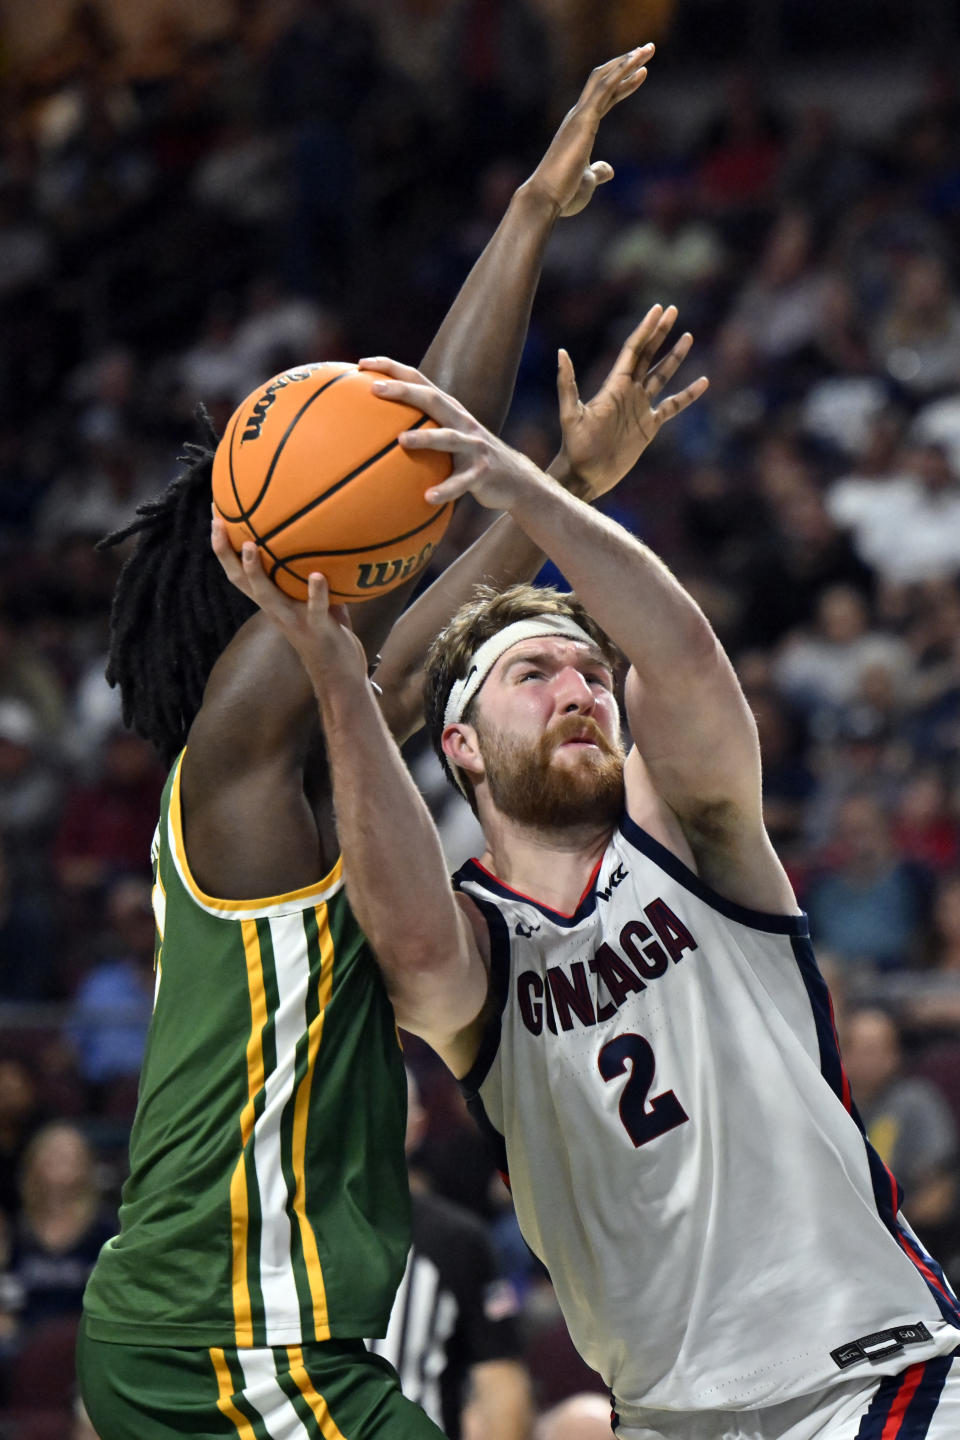 Gonzaga forward Drew Timme (2) looks to shoot against San Francisco during the second half of an NCAA college basketball game in the semifinals of the West Coast Conference men's tournament Monday, March 6, 2023, in Las Vegas. (AP Photo/David Becker)